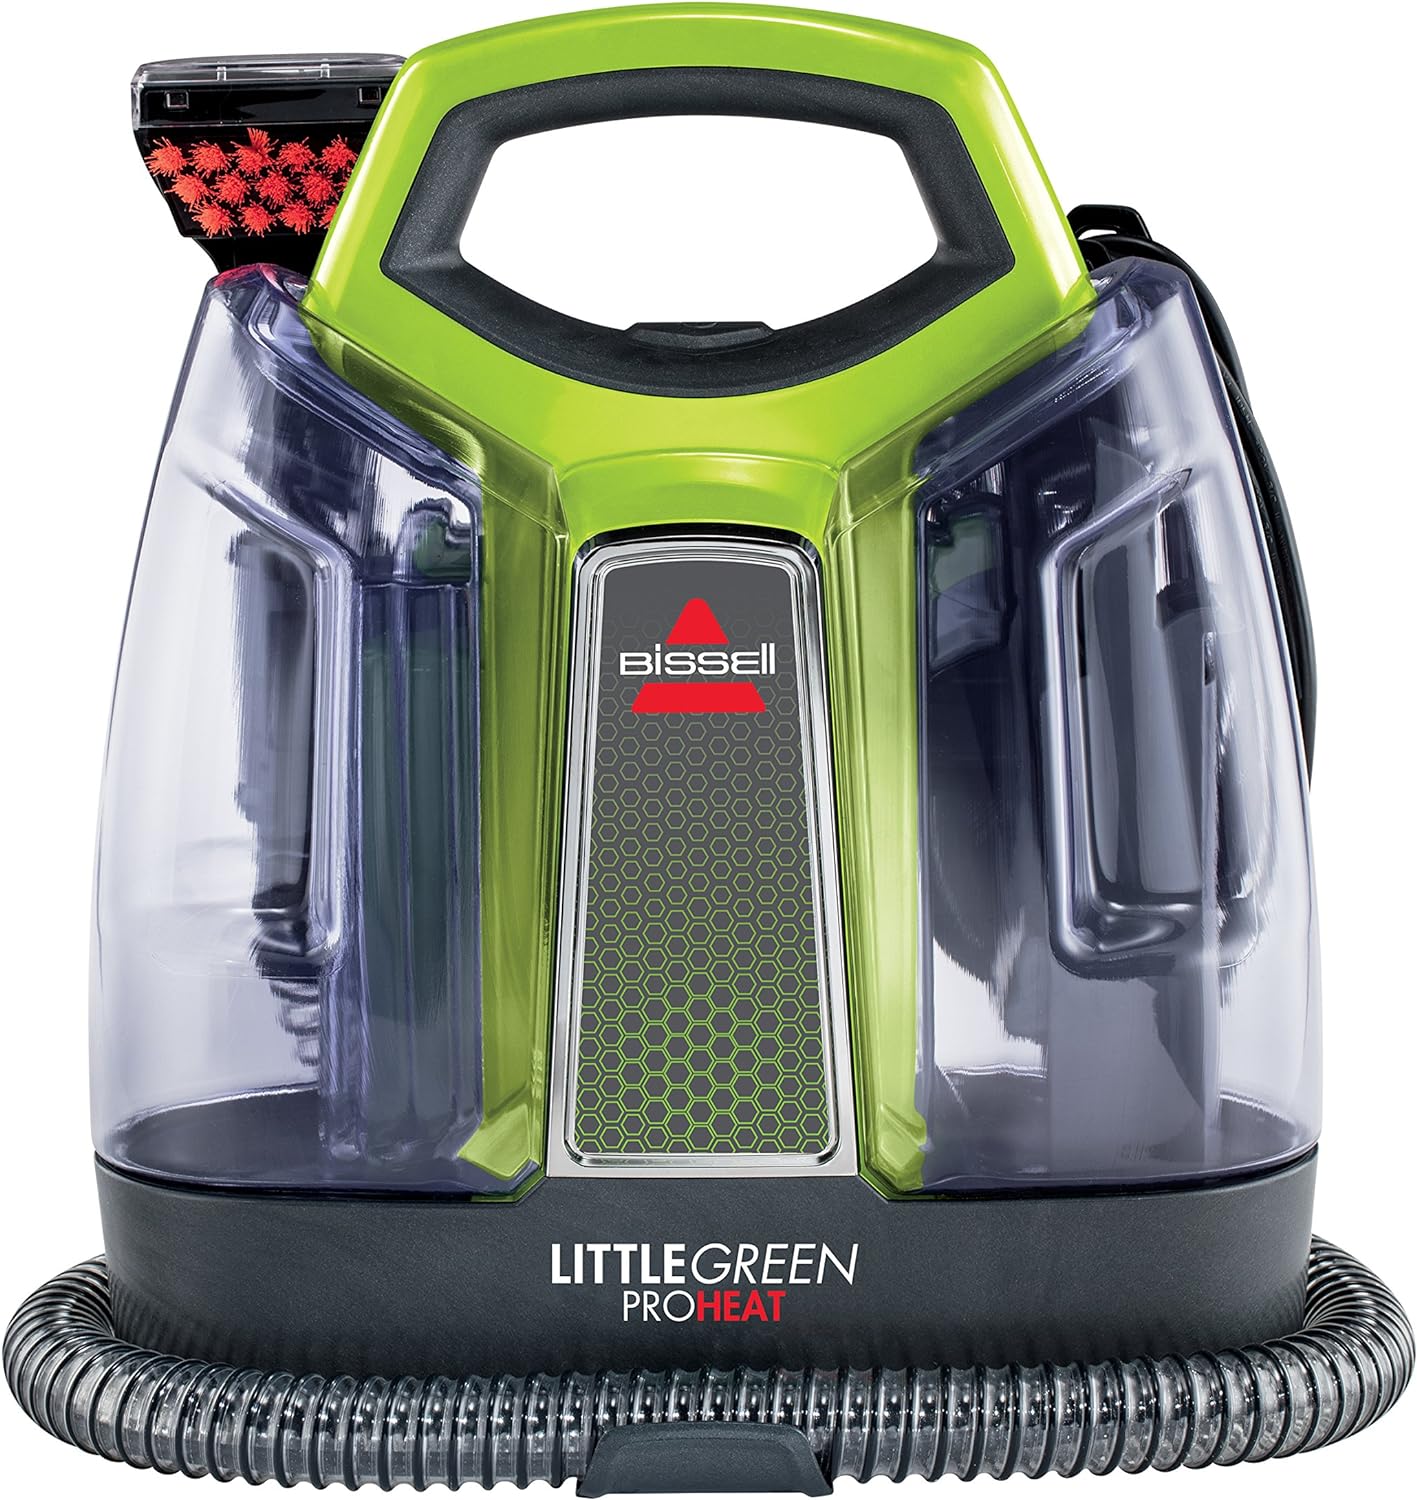 Bissell Little Green Original ProHeat Machine - Portable Carpet & Upholstery Steam Cleaner